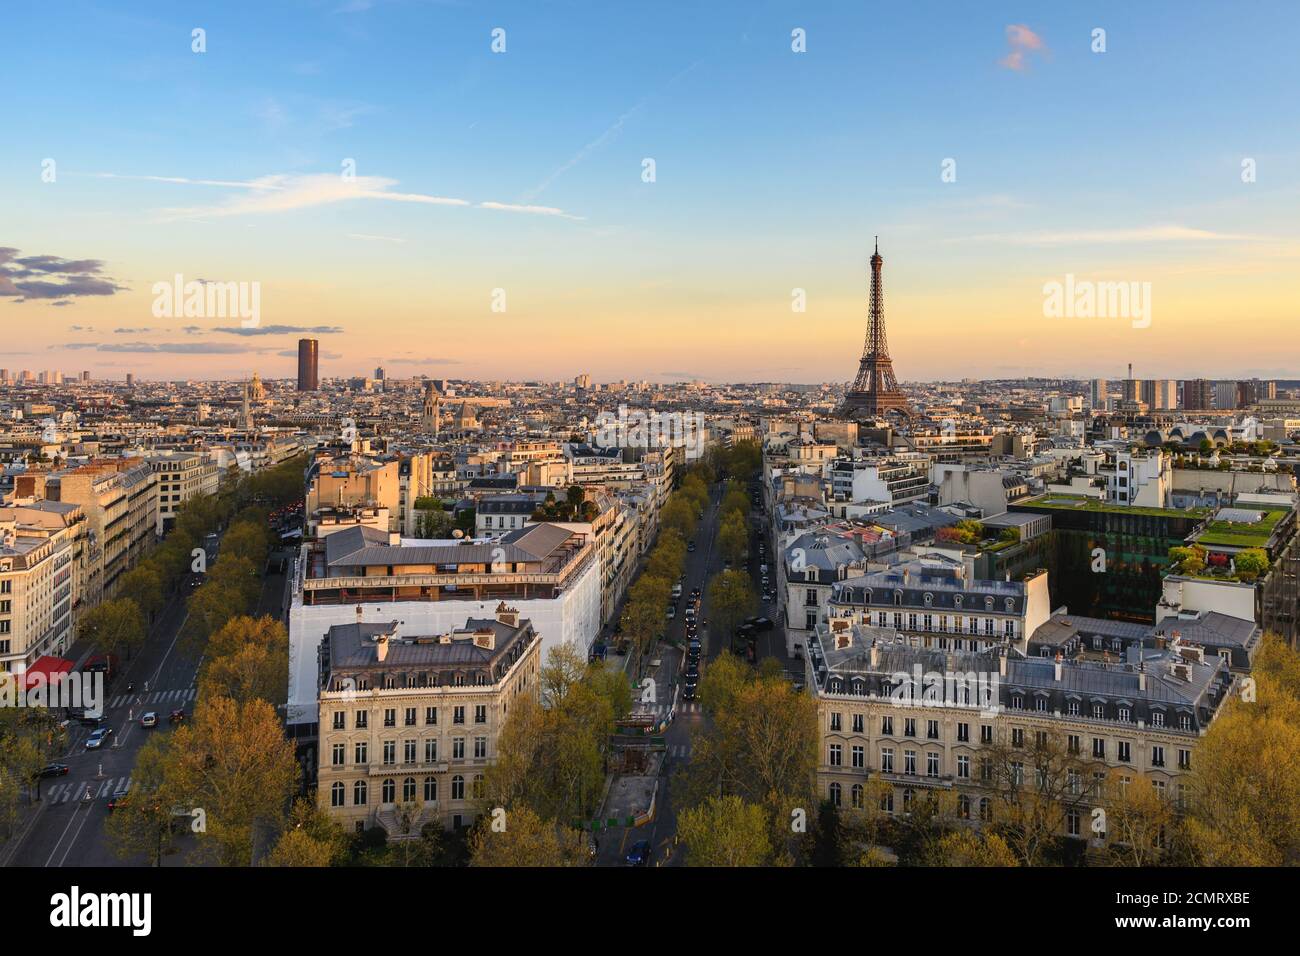 Street View Of Champselysees Avenue With Building Louis Vuitton In Paris  France Stock Photo - Download Image Now - iStock